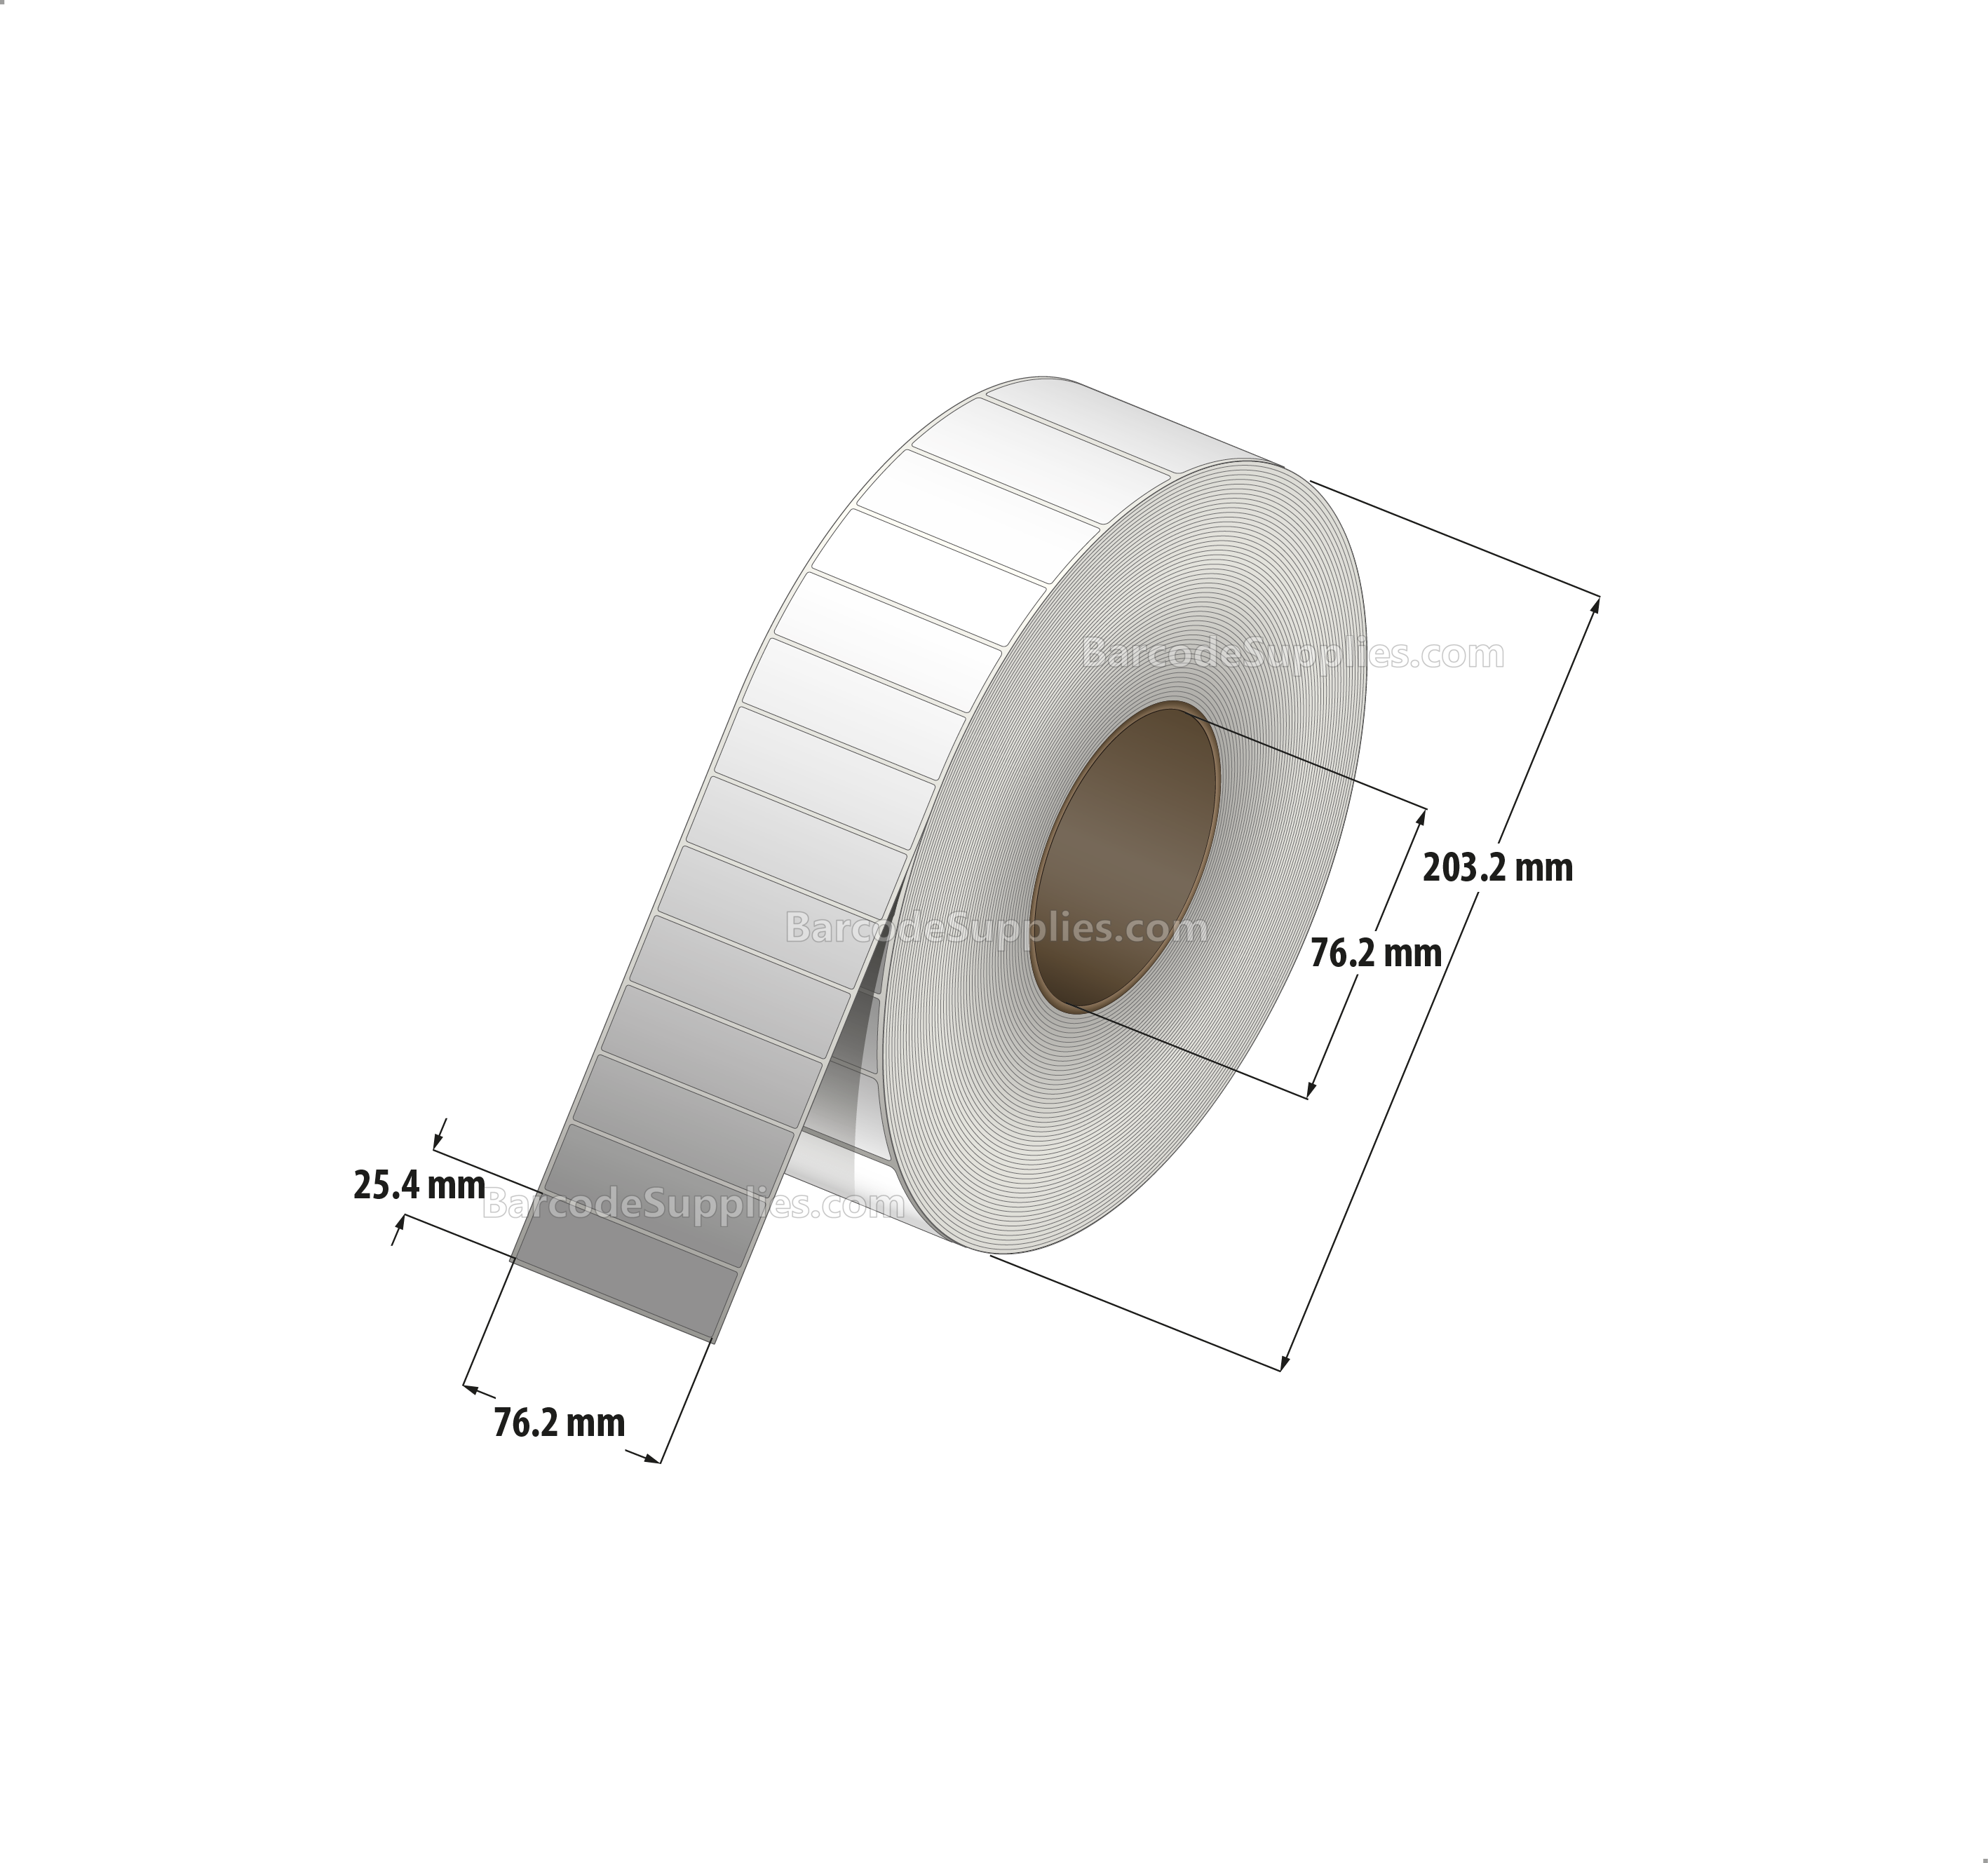 3 x 1 Thermal Transfer White Labels With Rubber Adhesive - No Perforation - 5000 Labels Per Roll - Carton Of 6 Rolls - 30000 Labels Total - MPN: CTT300100-3